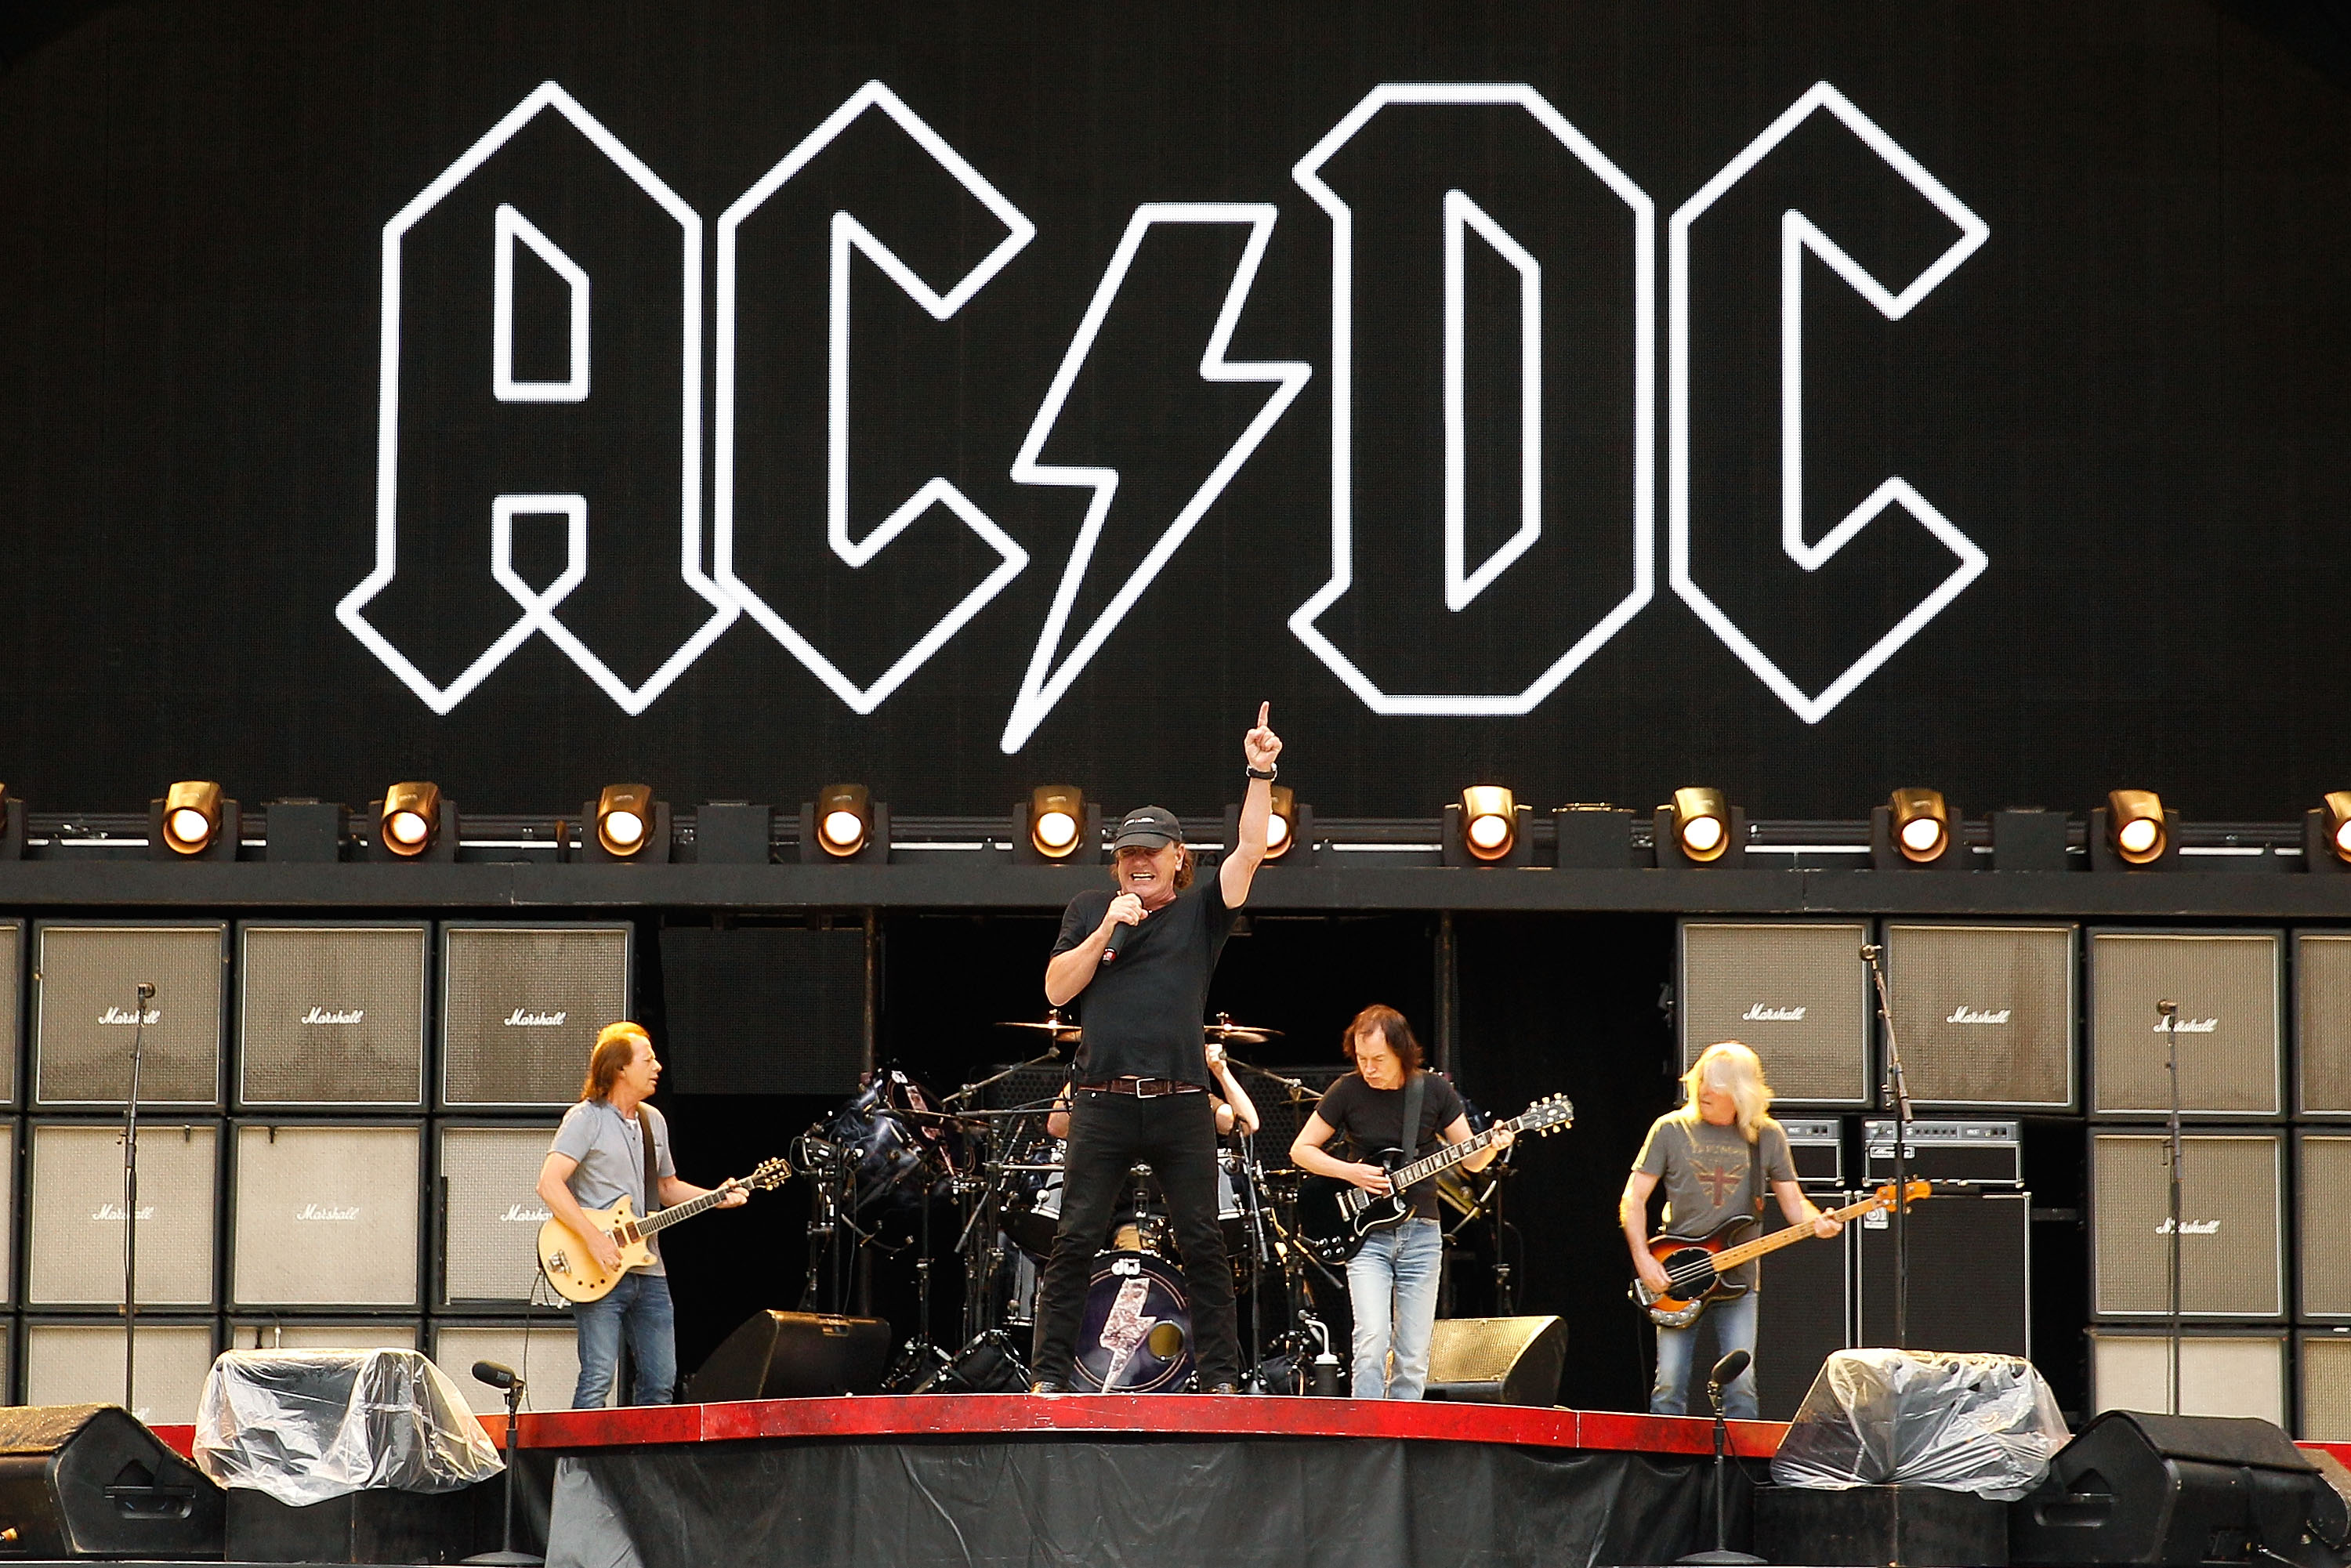 Where is AC/DC? 5 Fast Facts You Need to Know